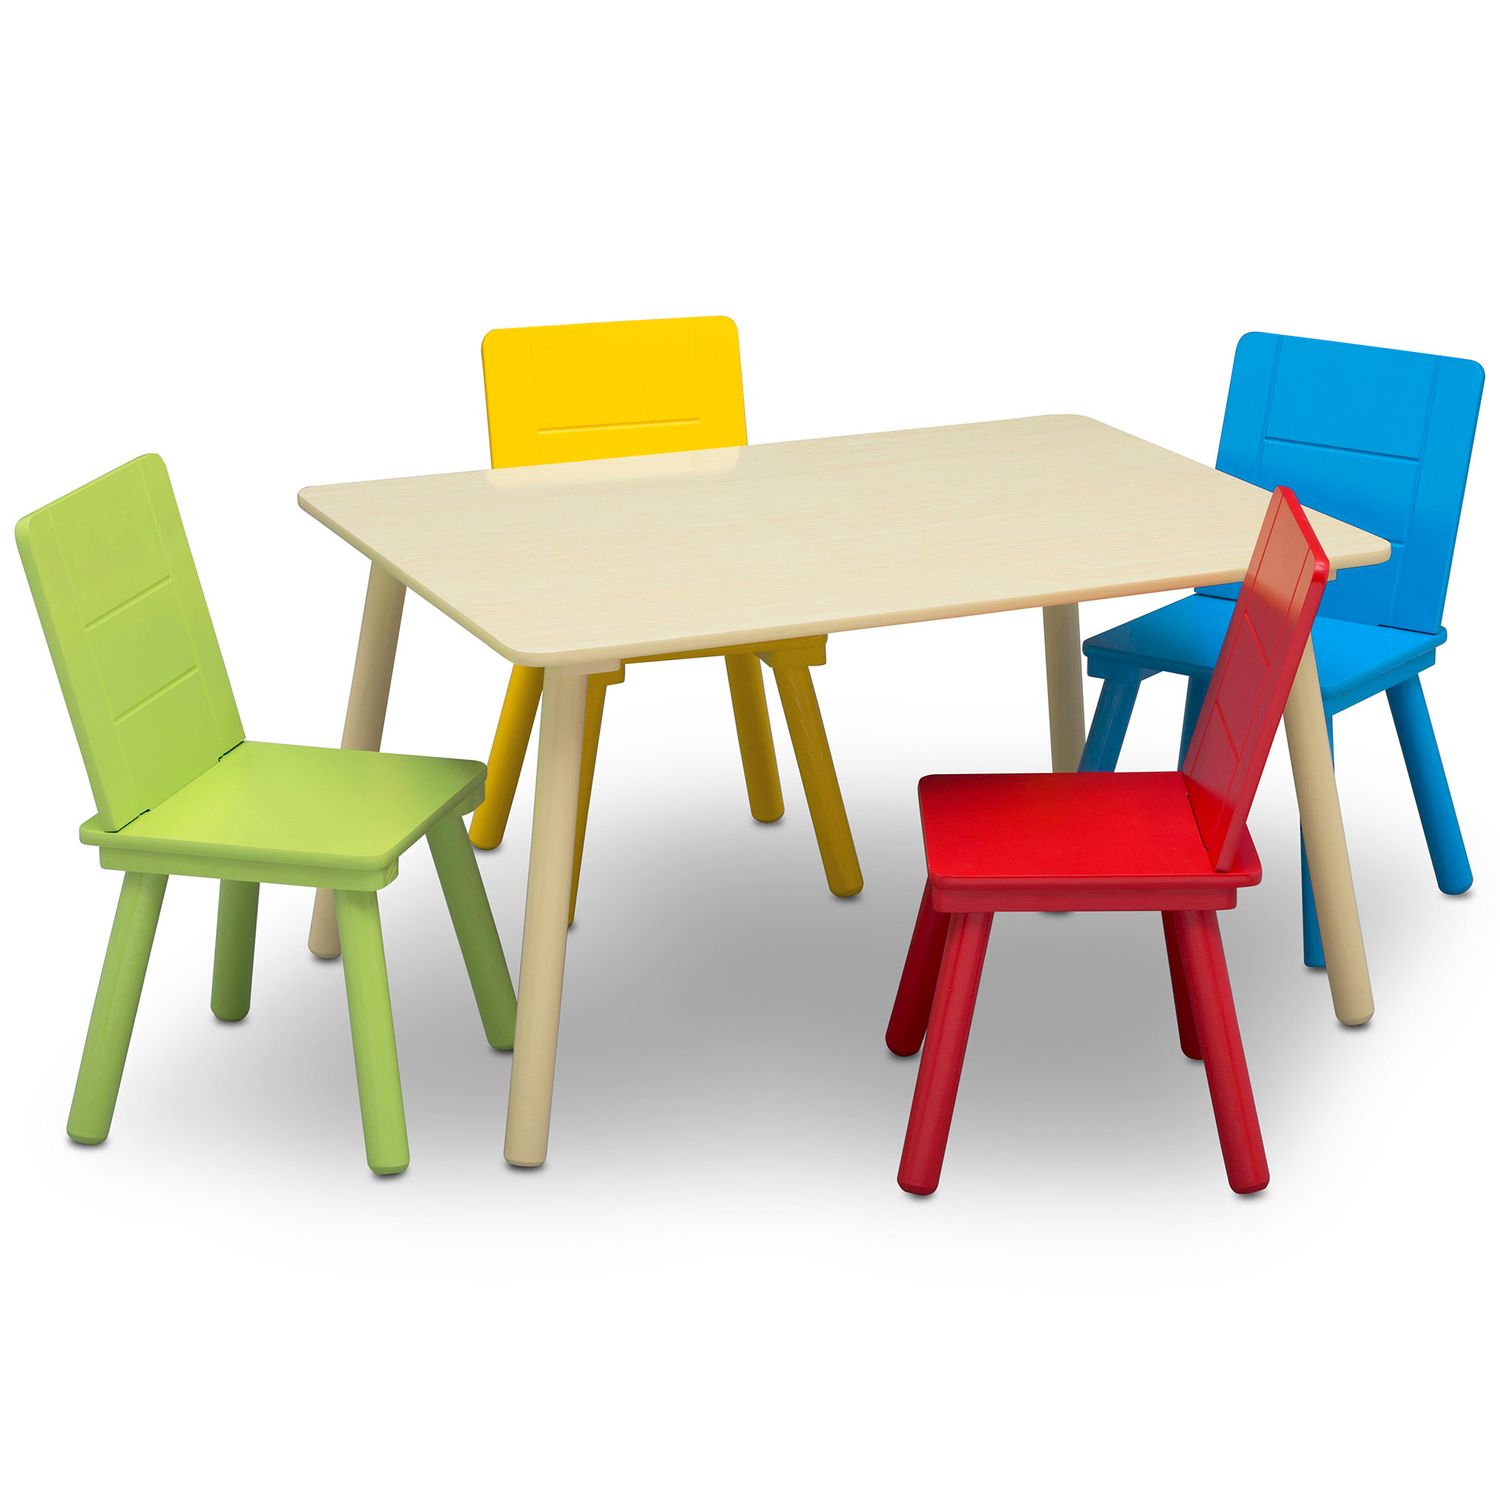 colorful kids chairs